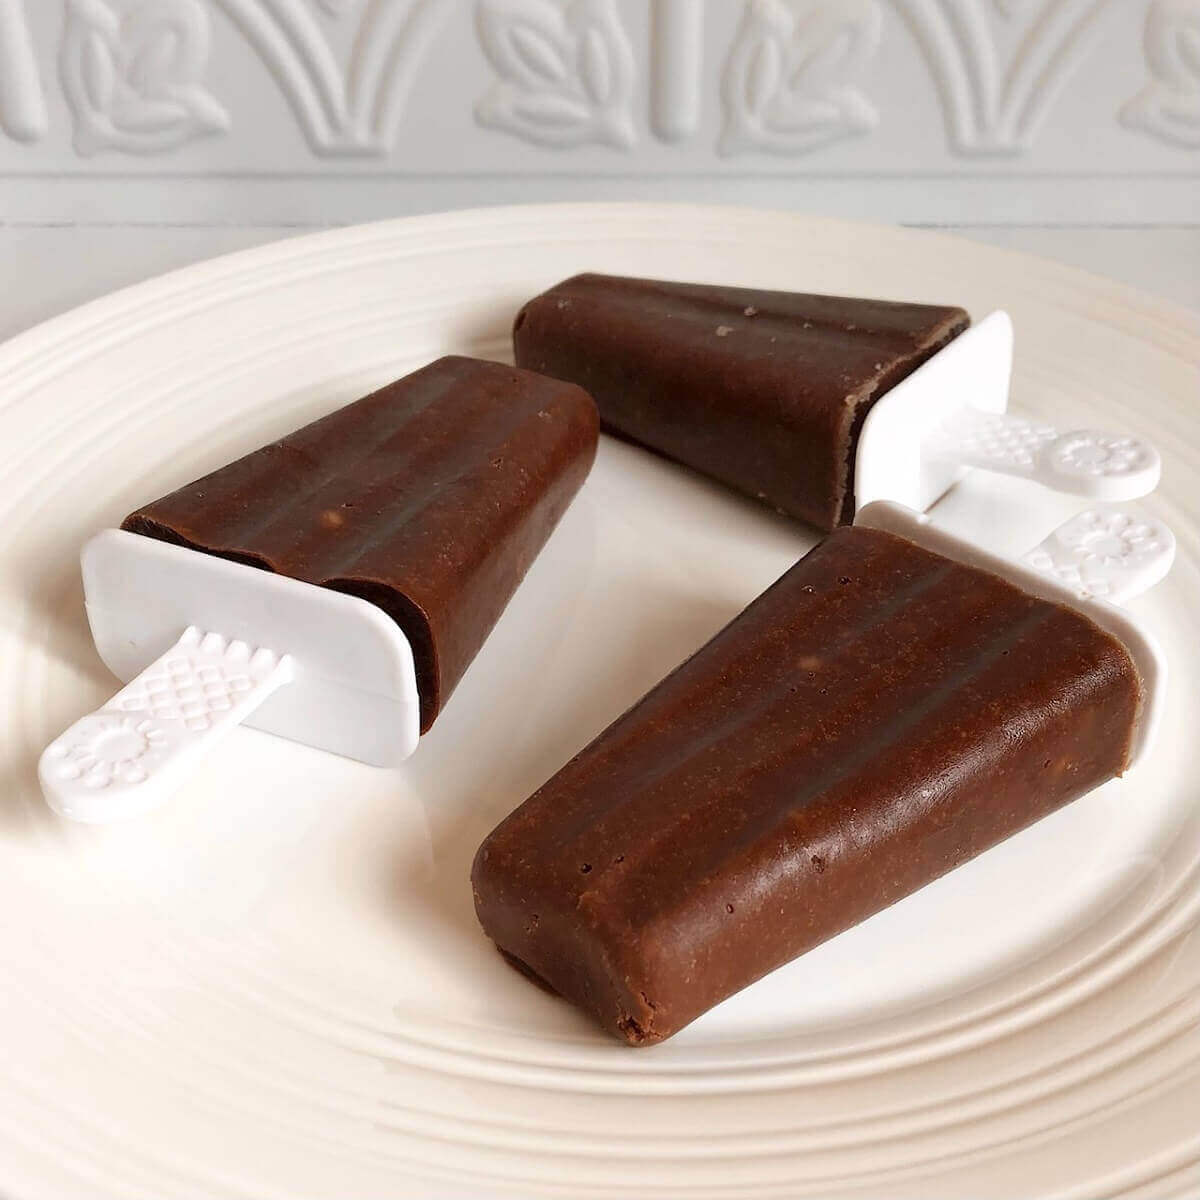 Three banana chocolate popsicles on a plate.